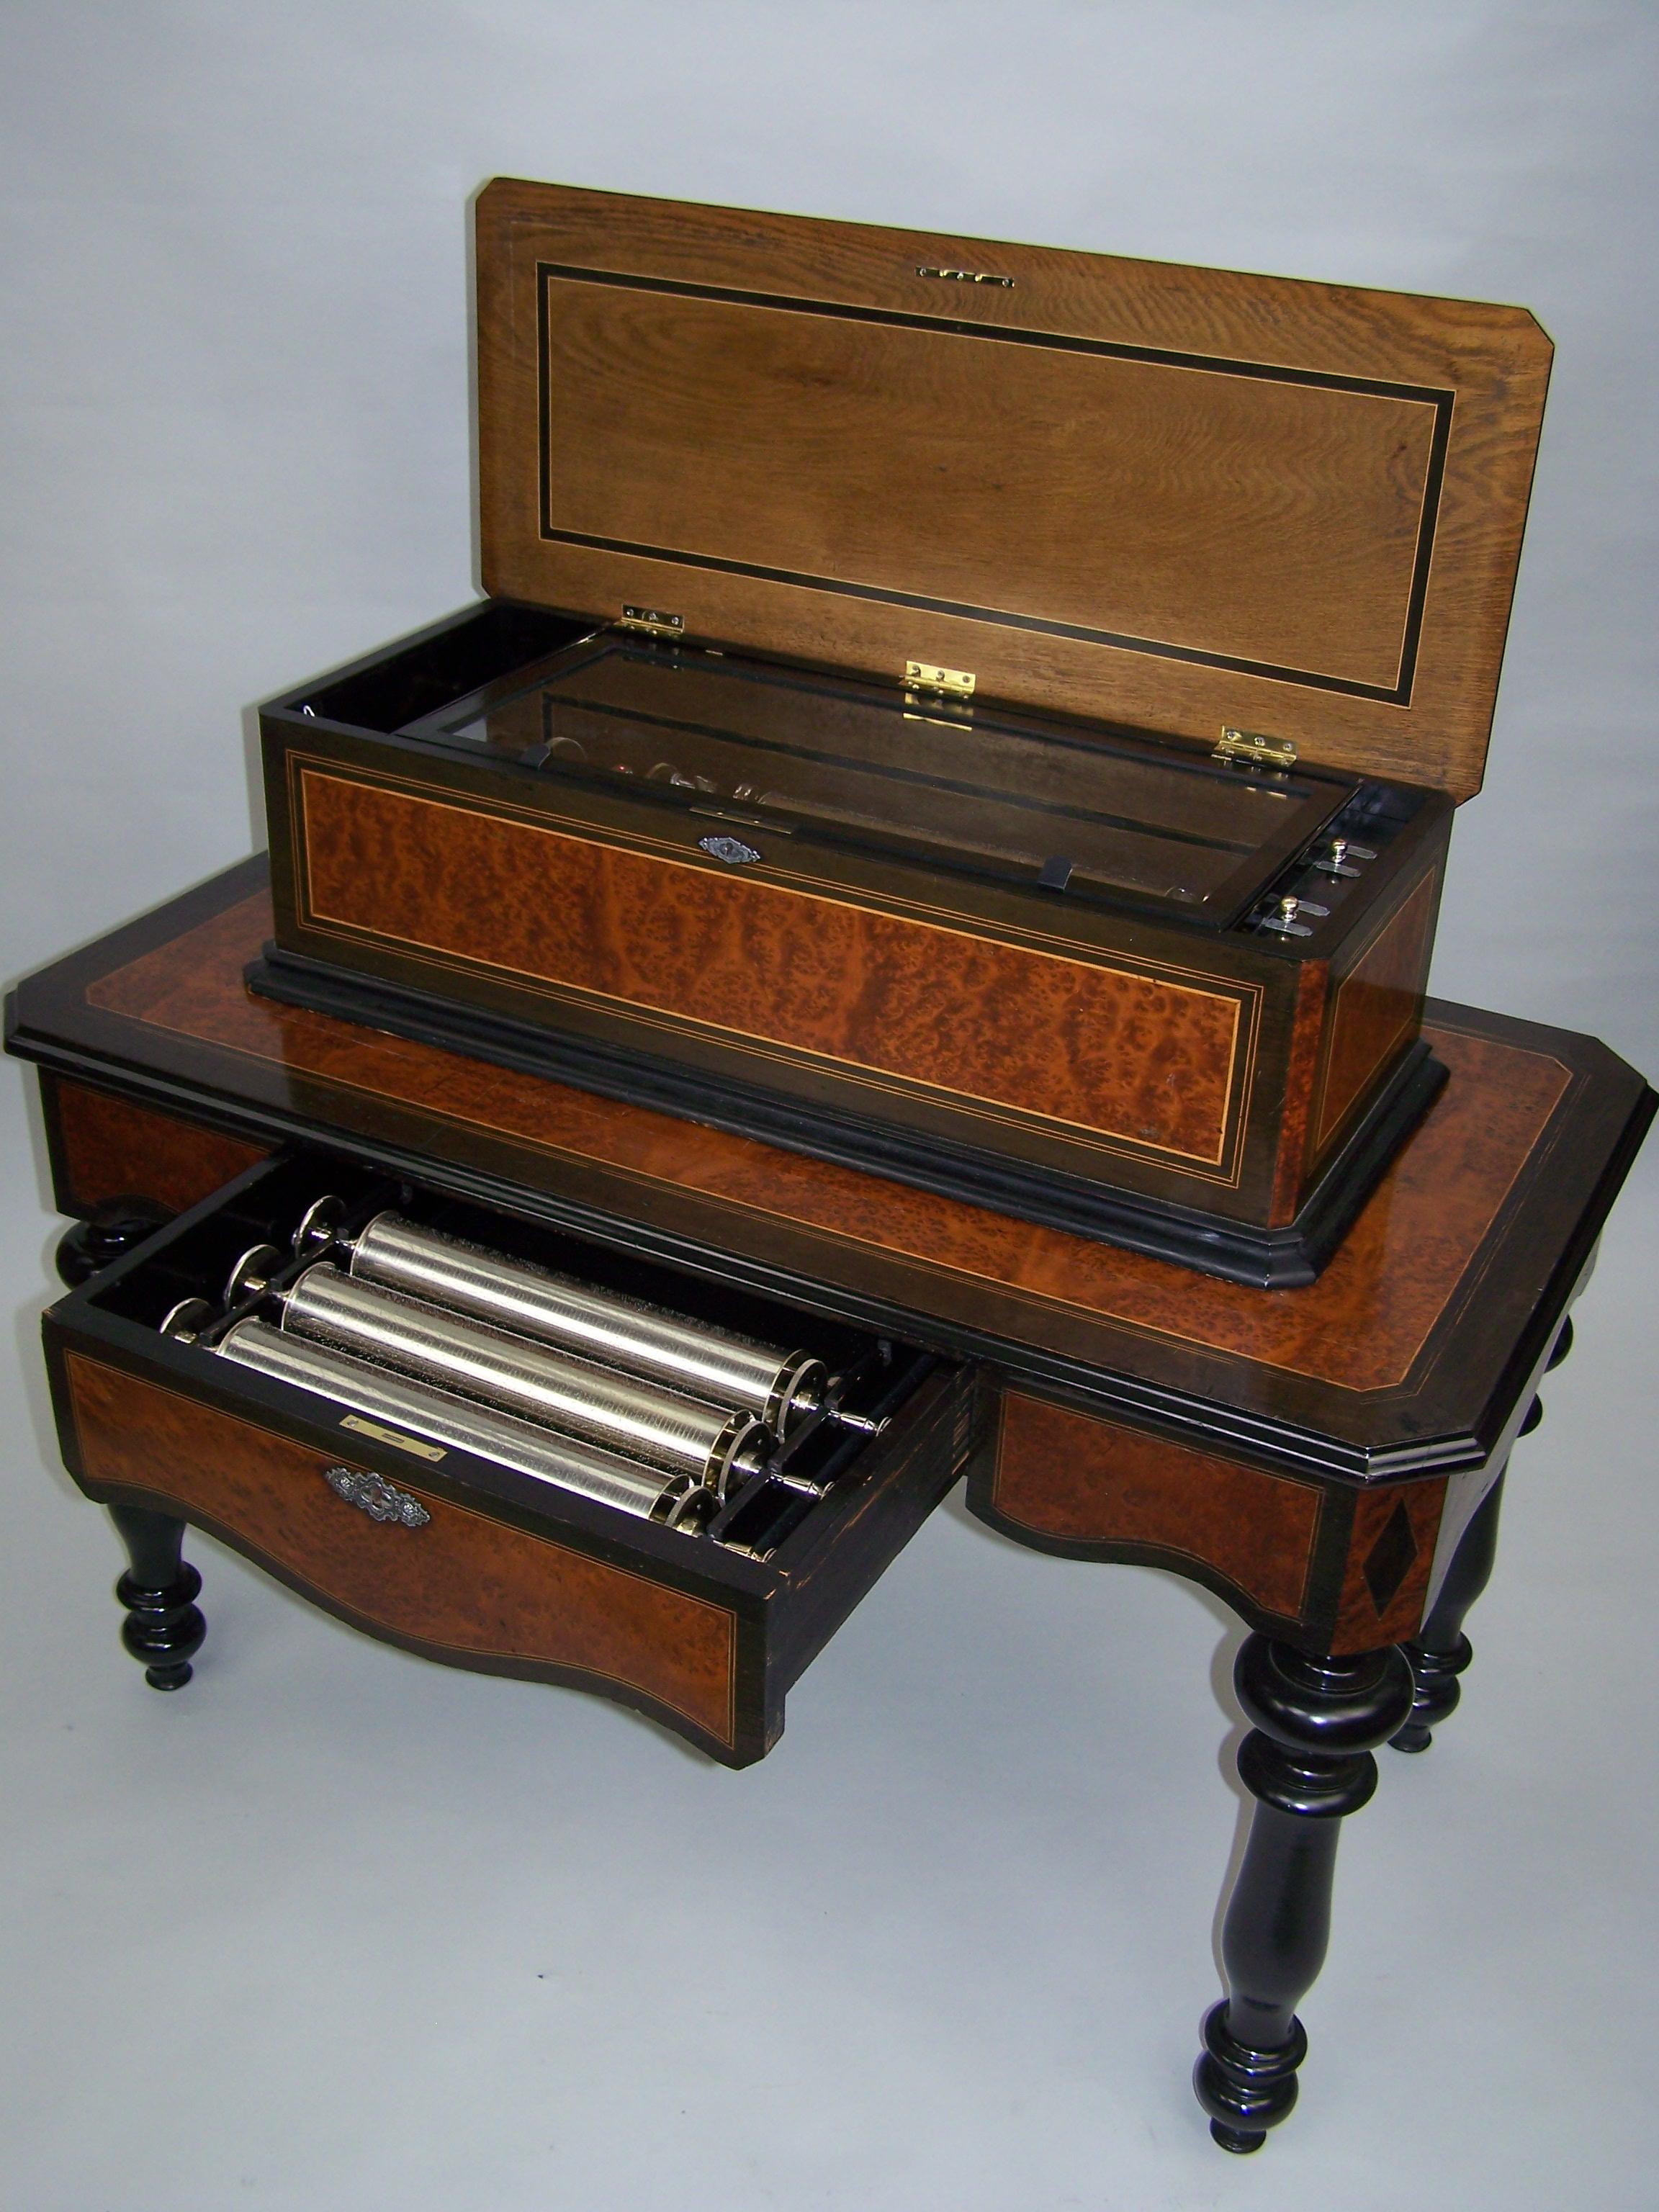 Rare cylinder music box. The 4 cylinders play 8 tunes as indicated on the original tunesheets.
The bird-eye marquetry of the case and matching table is all original. There are satinwood linings to top front, and all sides of the table. Opening the